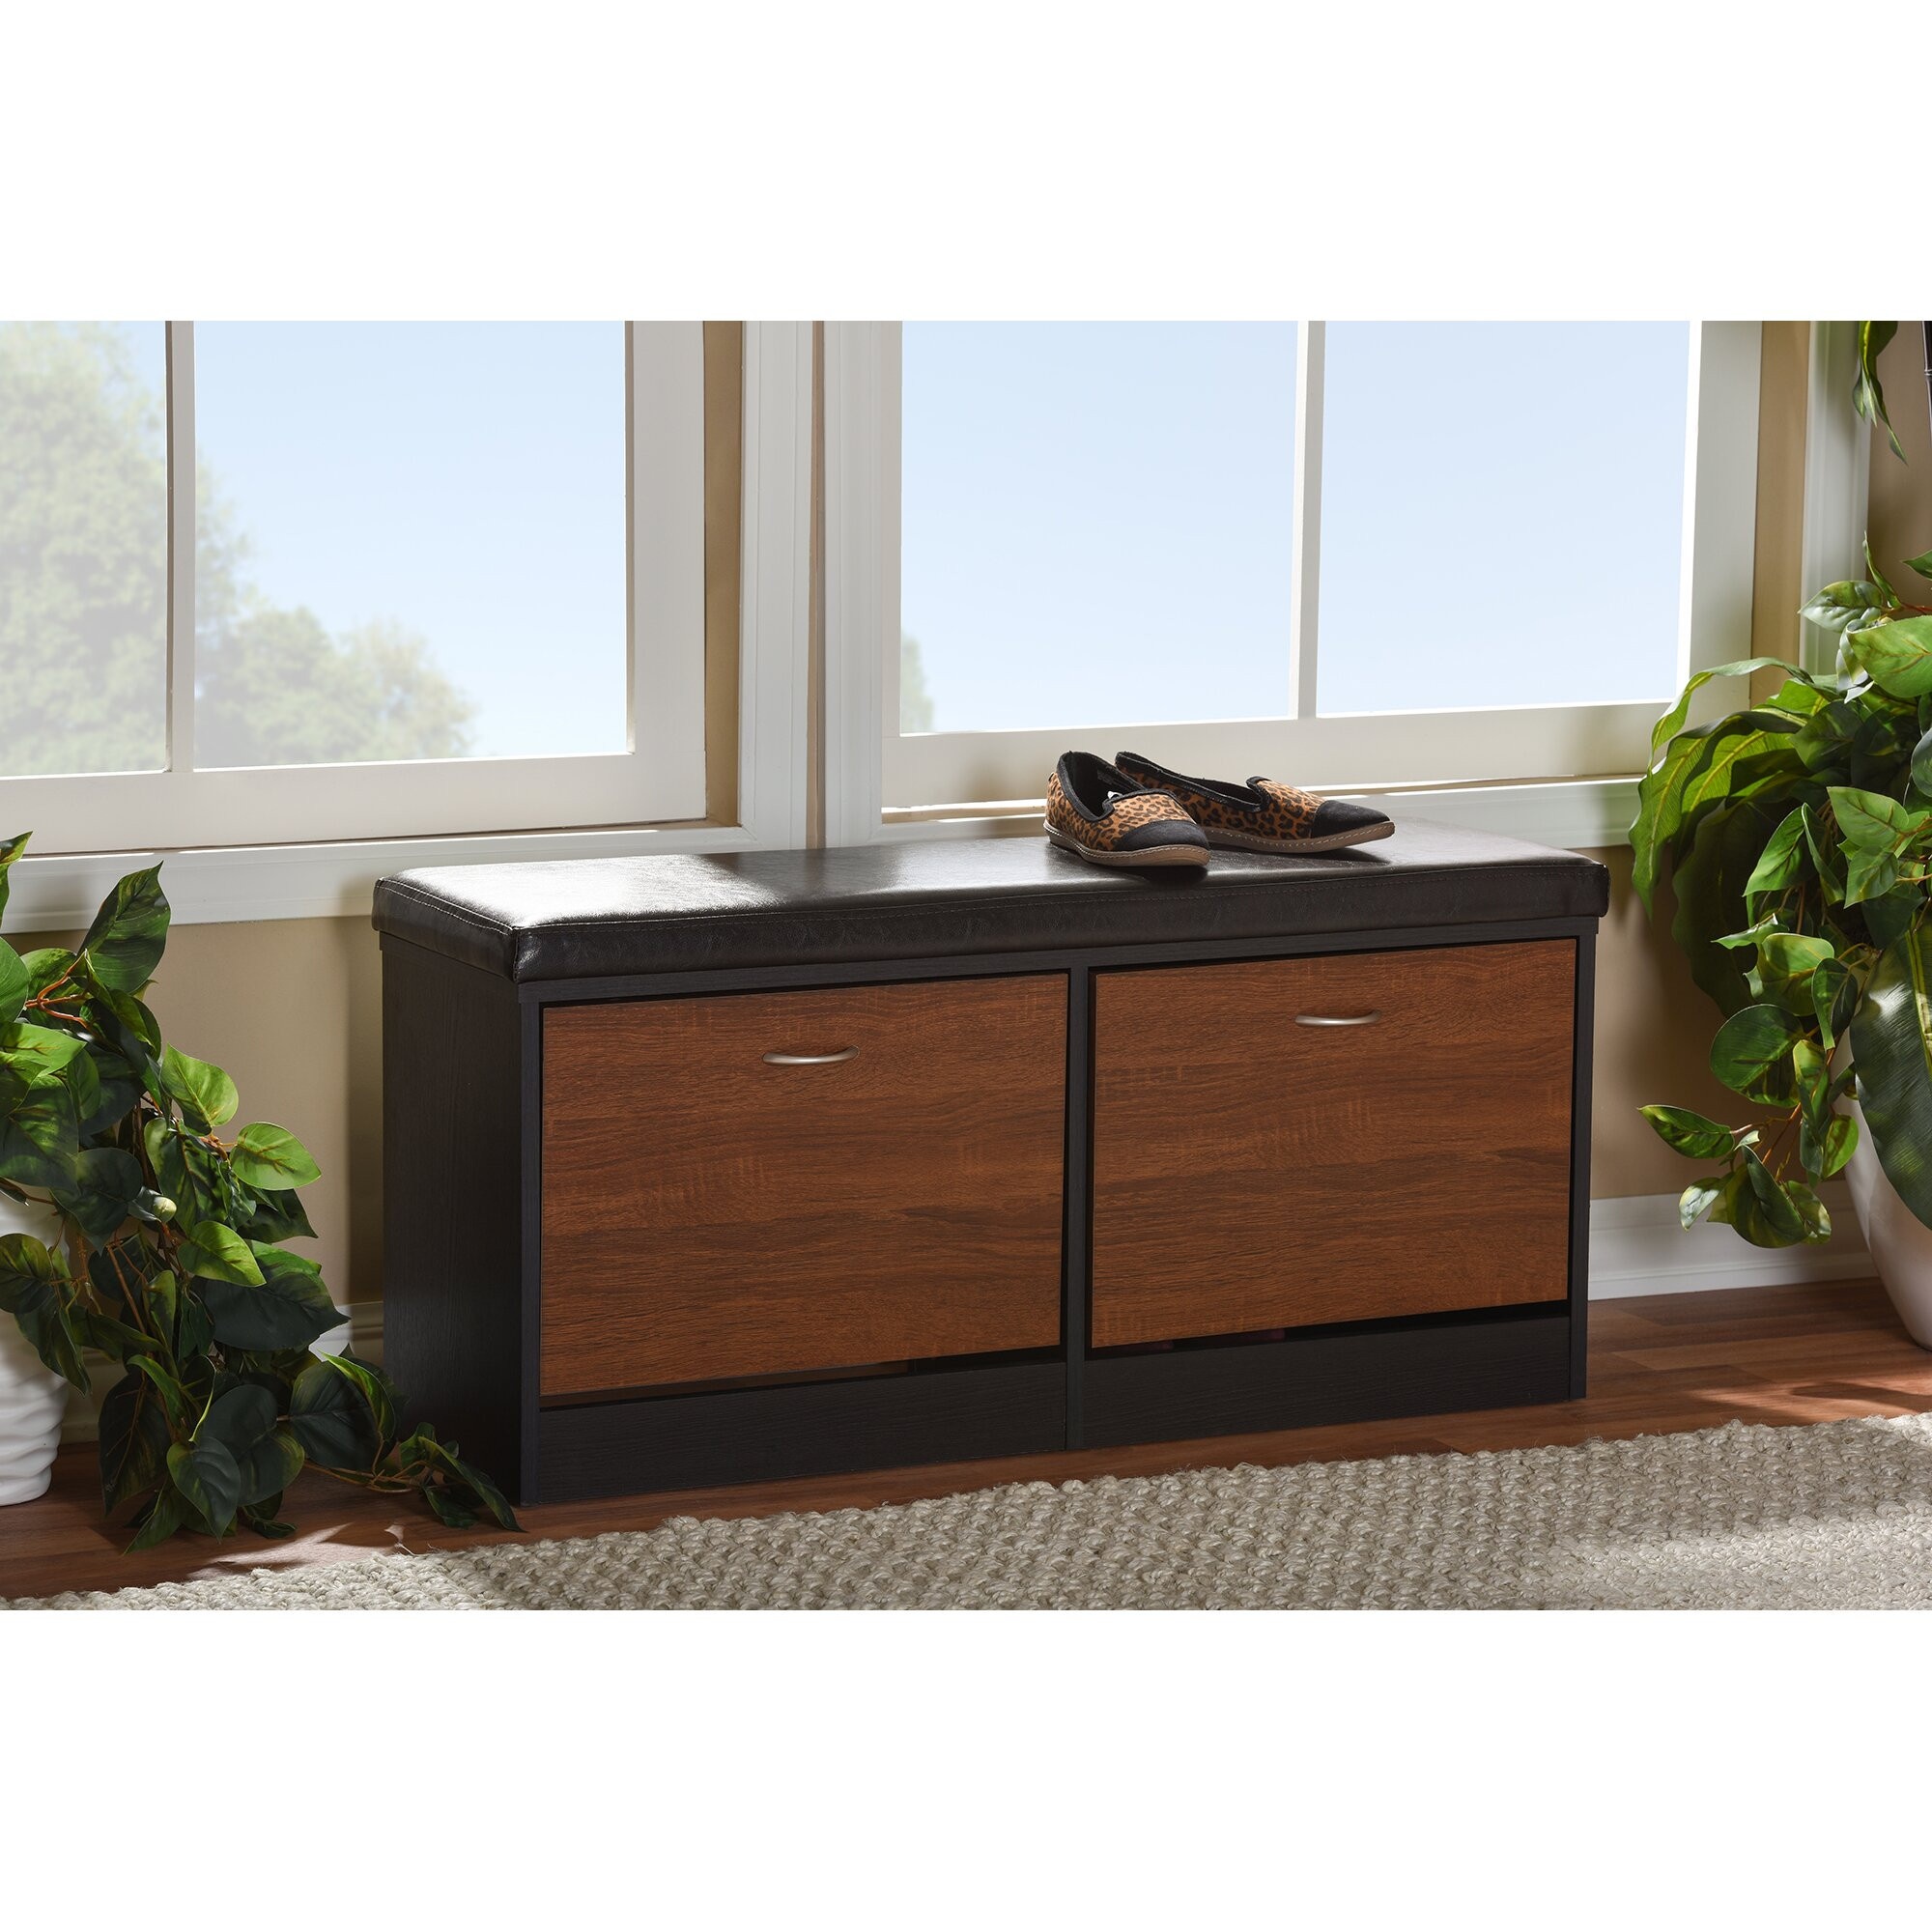 Modern Entryway Bench With Storage
 Wholesale Interiors Foley Wood Storage Entryway Bench